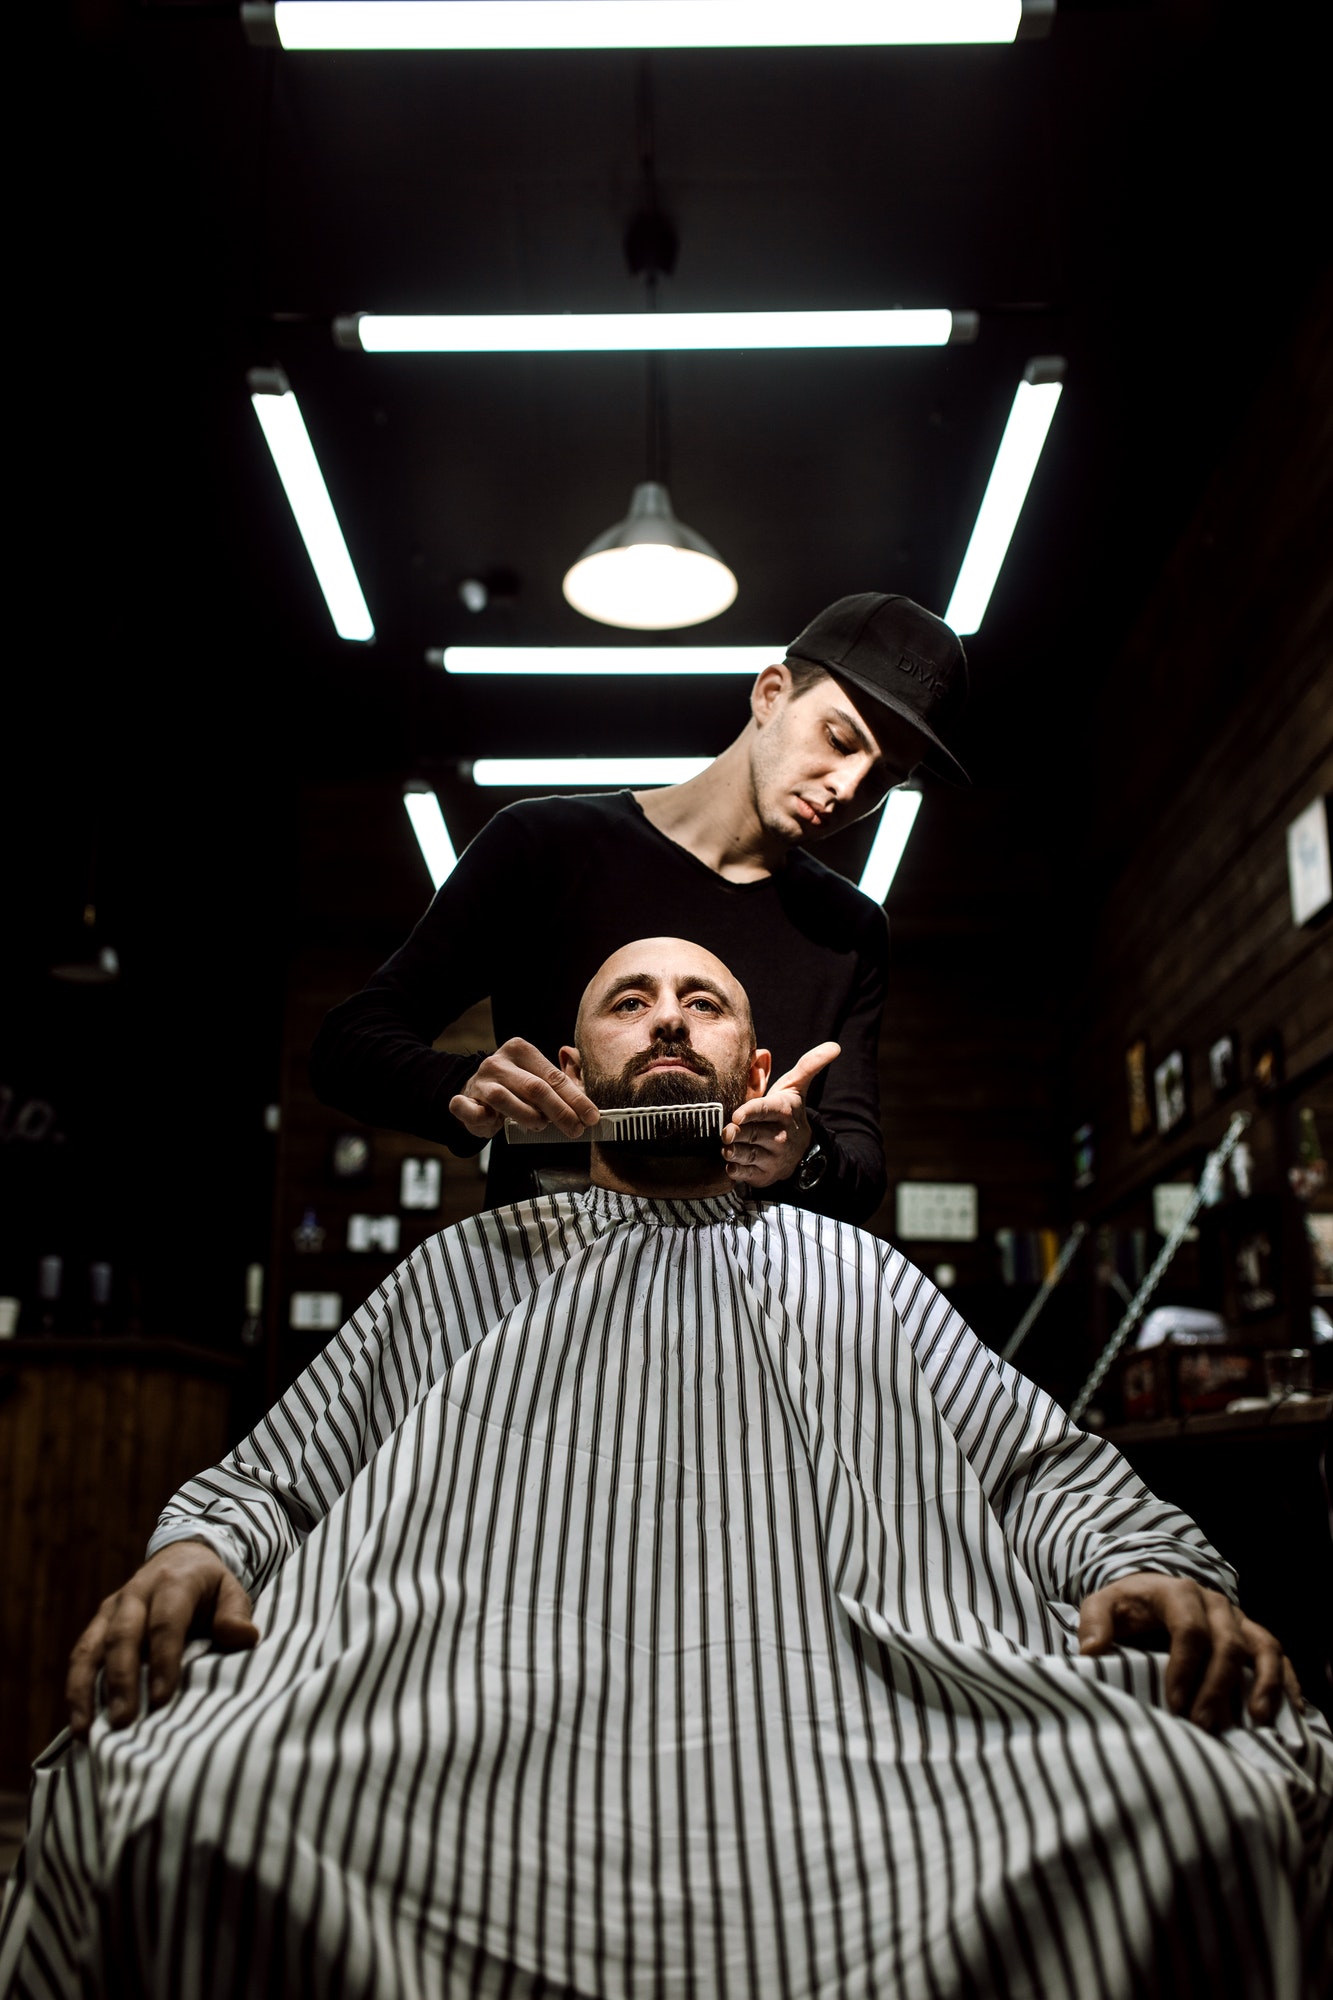 the-stylish-barbershop-the-fashion-barber-tidies-up-beard-of-brutal-man-sitting-in-the-armchair.jpg